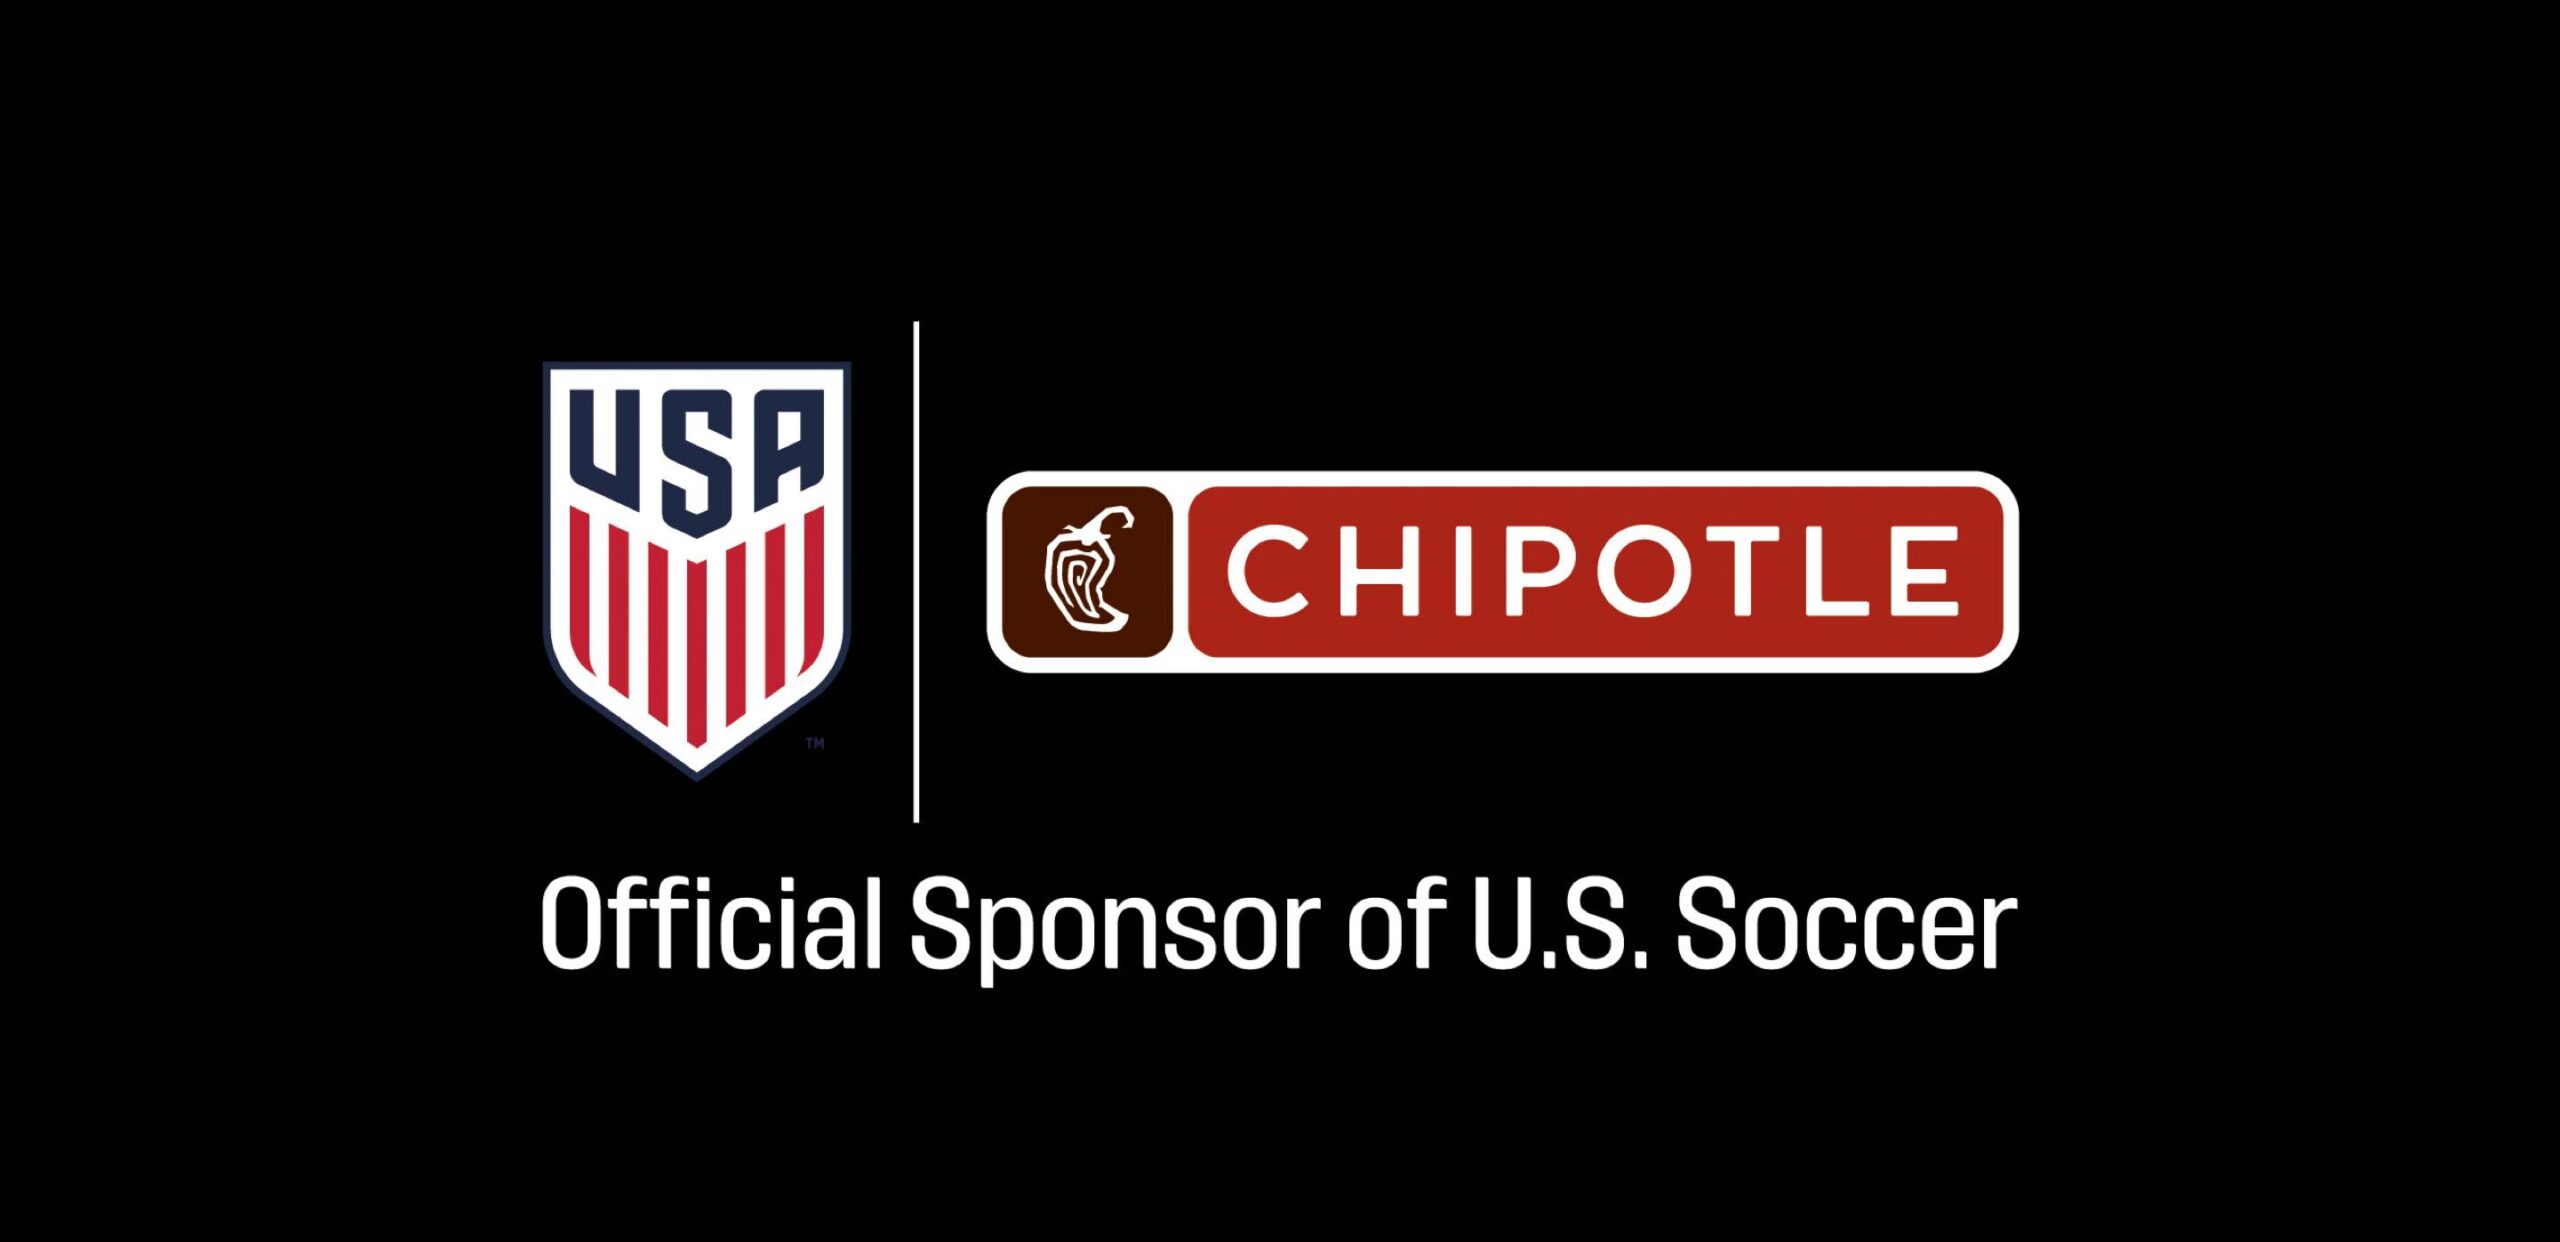 Free Chipotle Entree During the World Cup Games